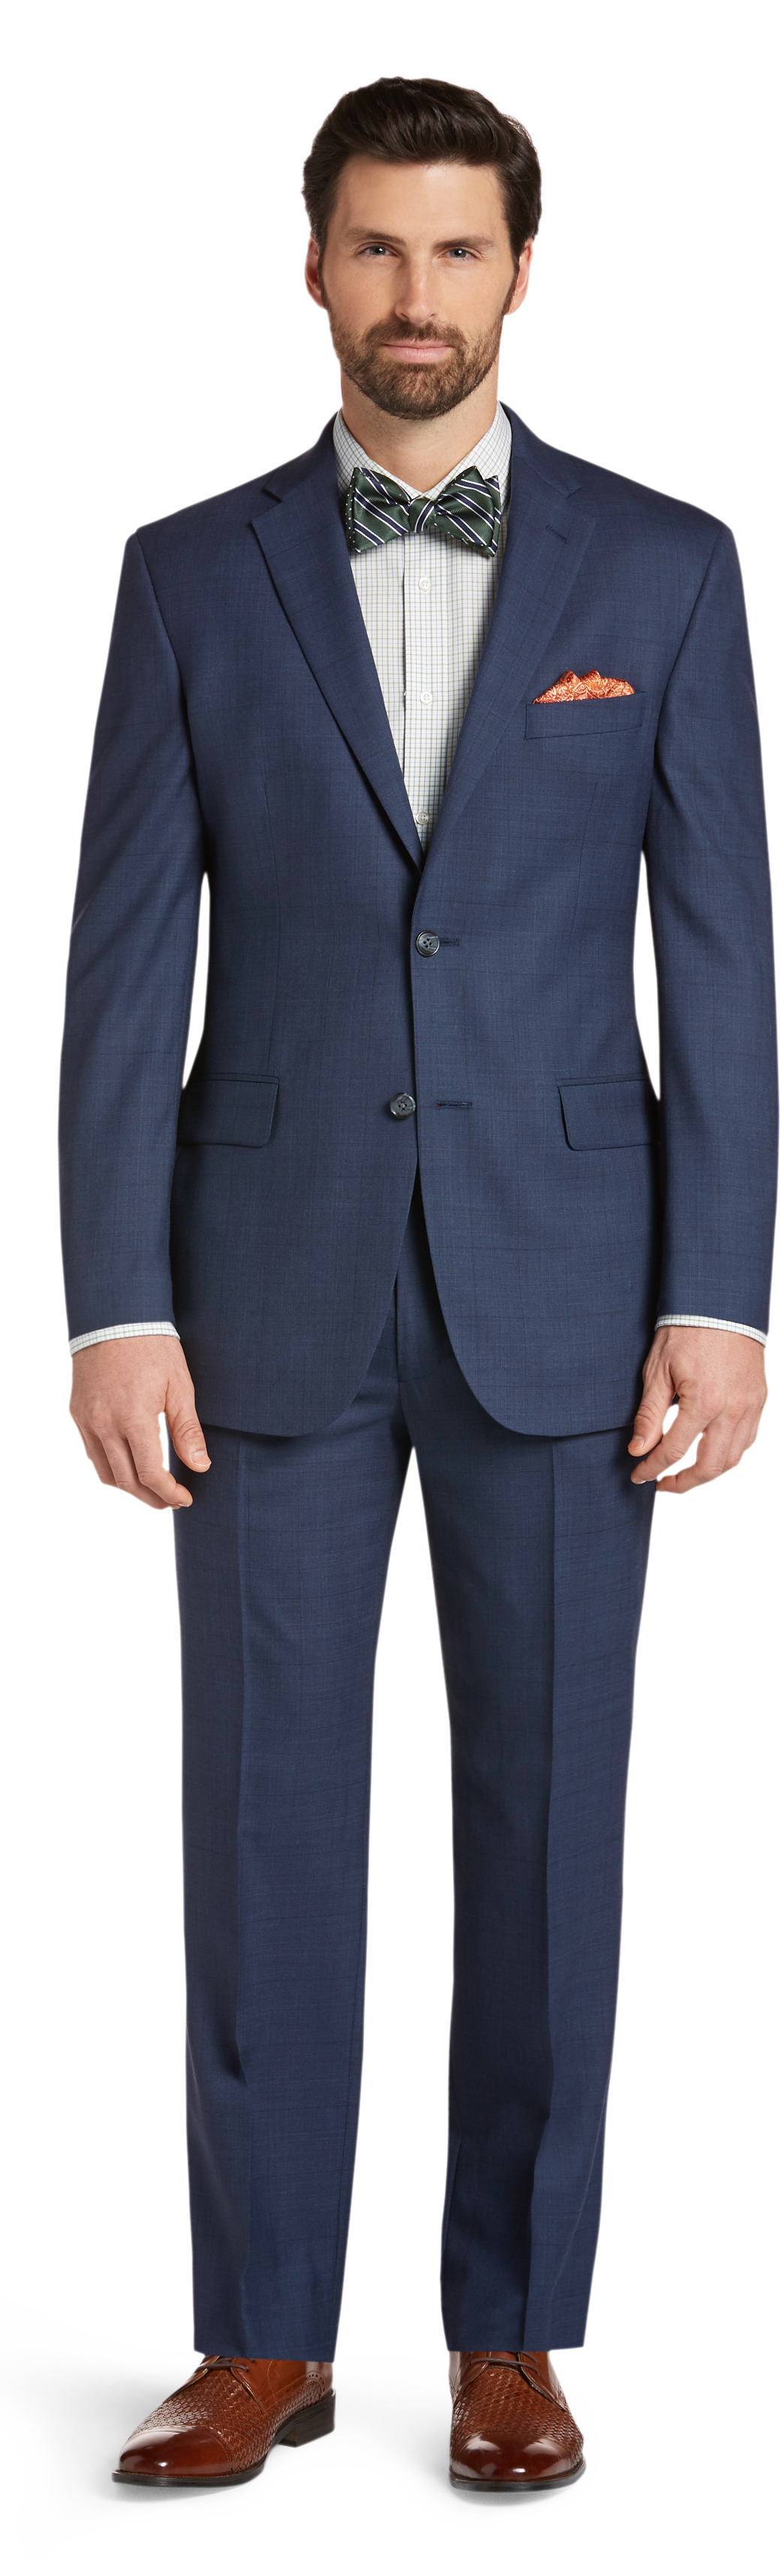 Traveler collection tailored fit window pane suit photo